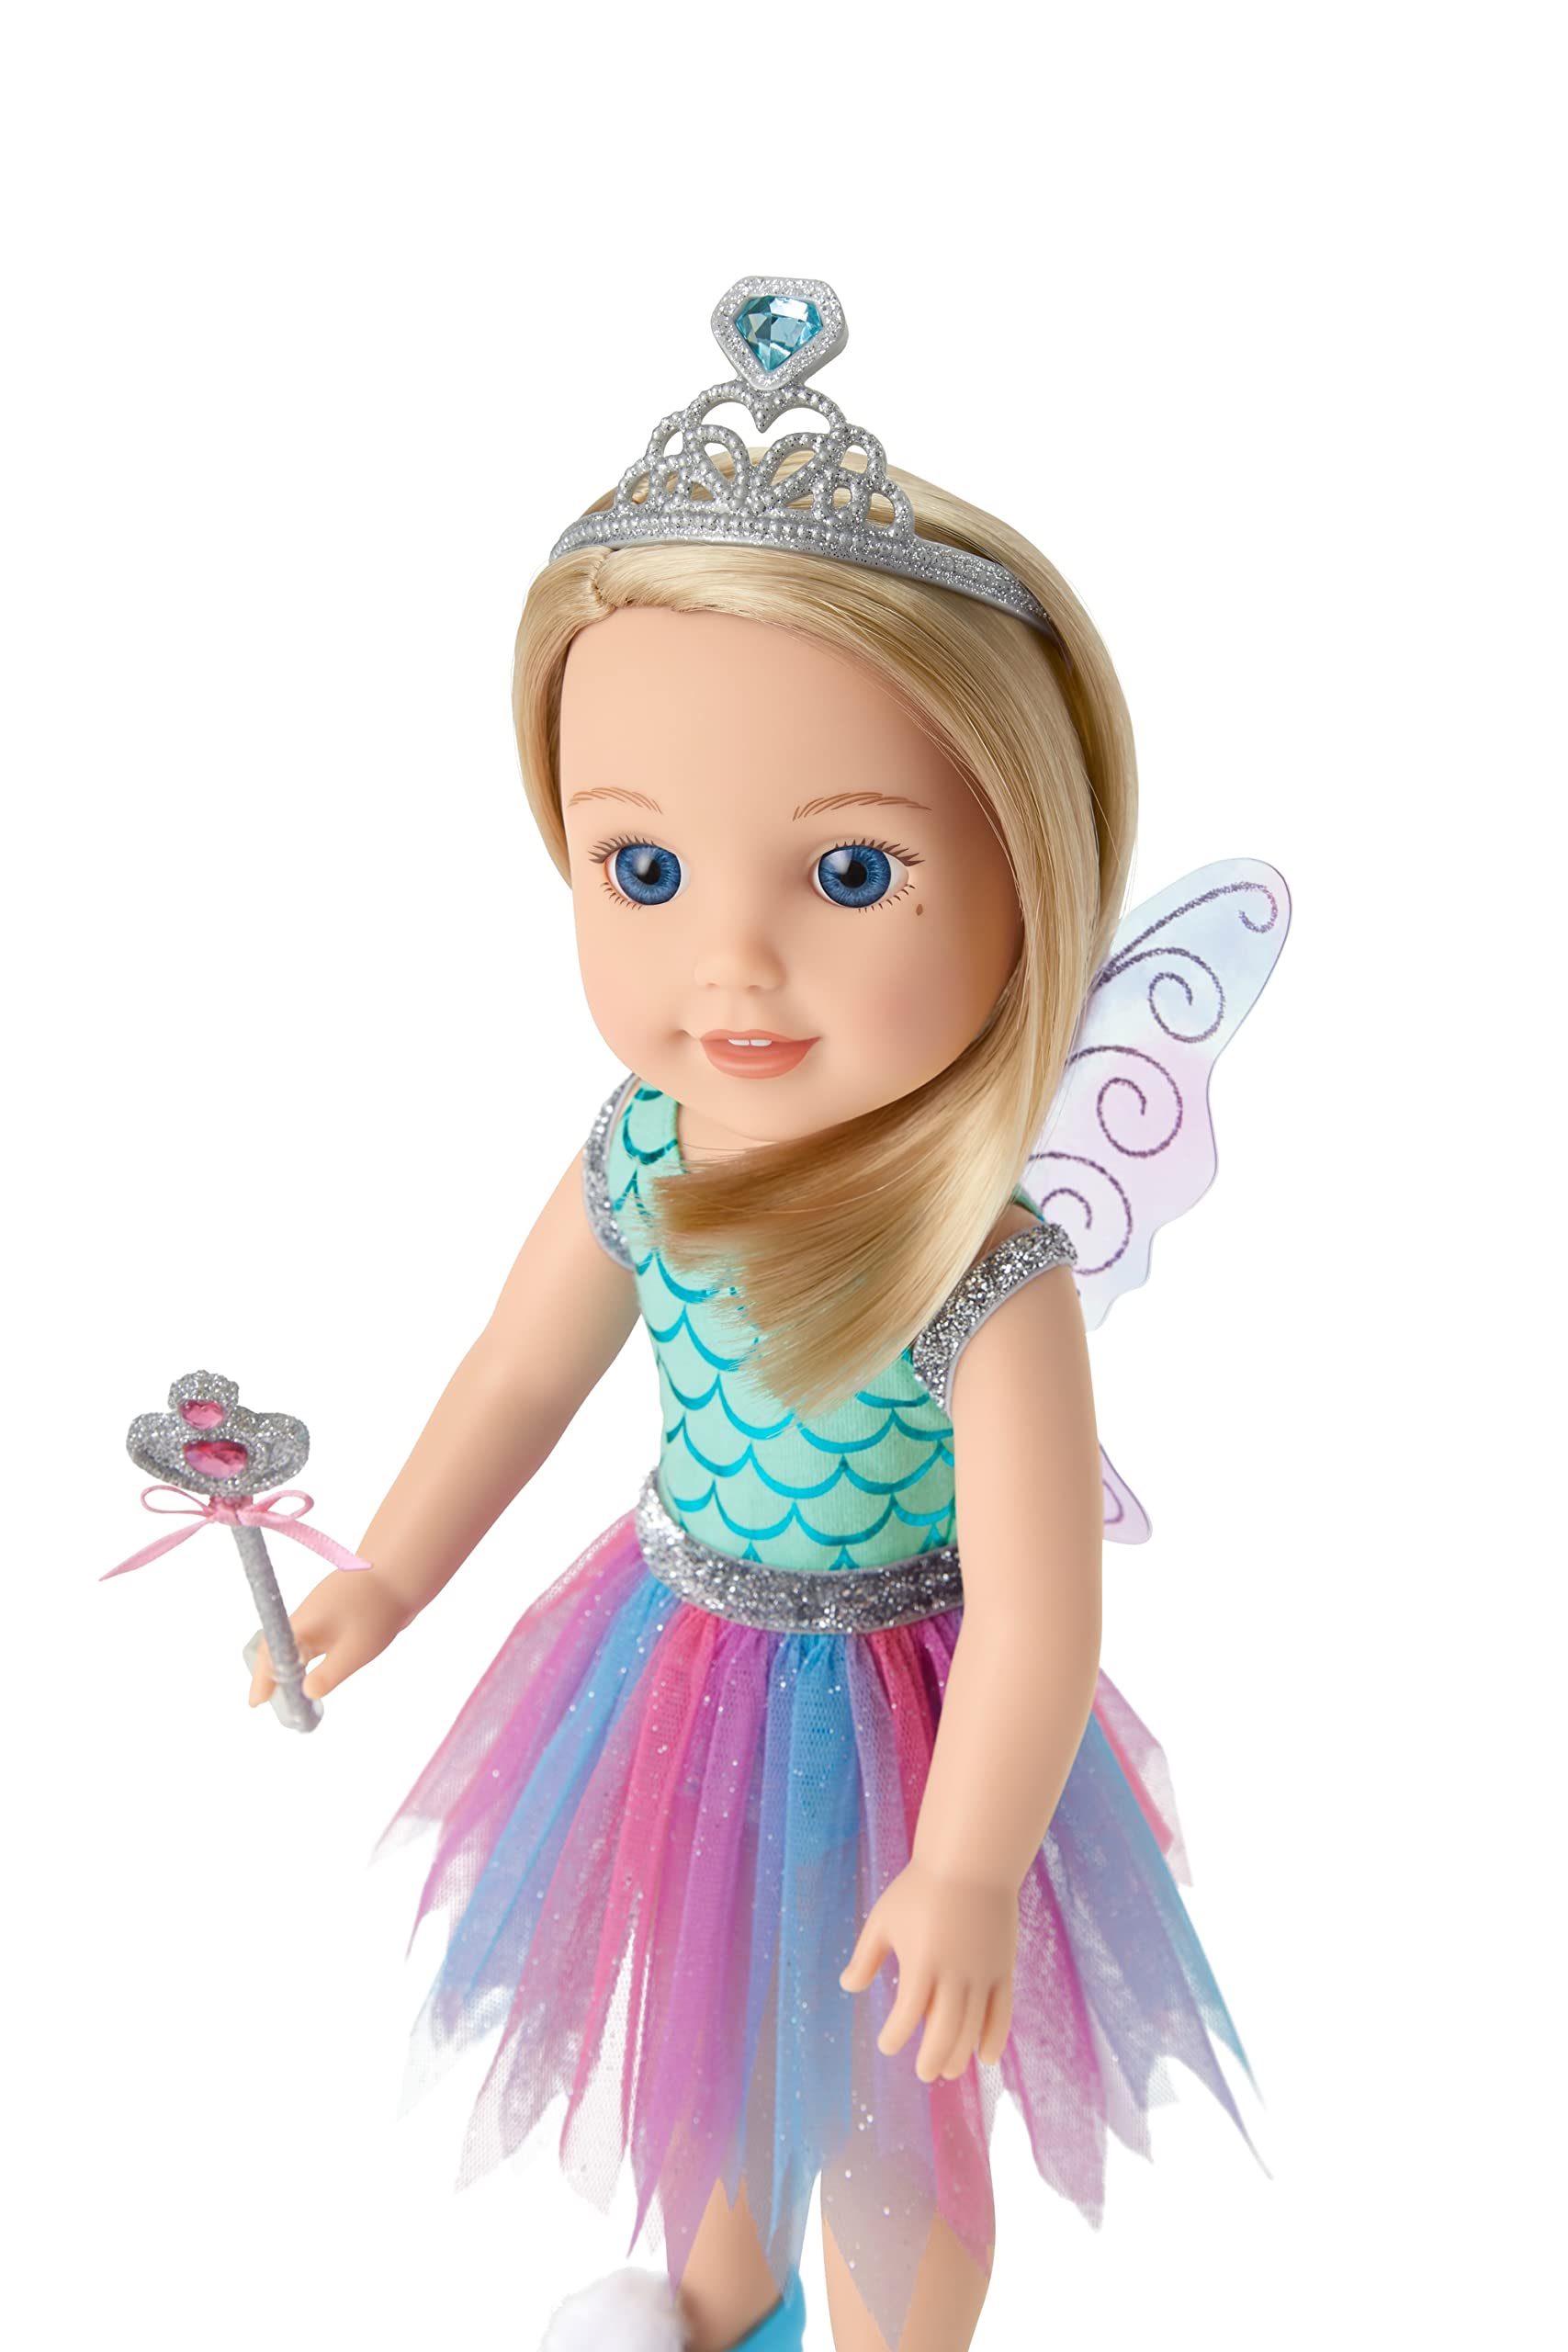 American Girl WellieWishers Colorful Butterfly Skirt & Wings Accessory Set for for 14.5-inch Dolls with a Multicolored Mesh Tutu, a Pair of Translucent Fairy Wings, Sparkly Silver Crown, Ages 4+